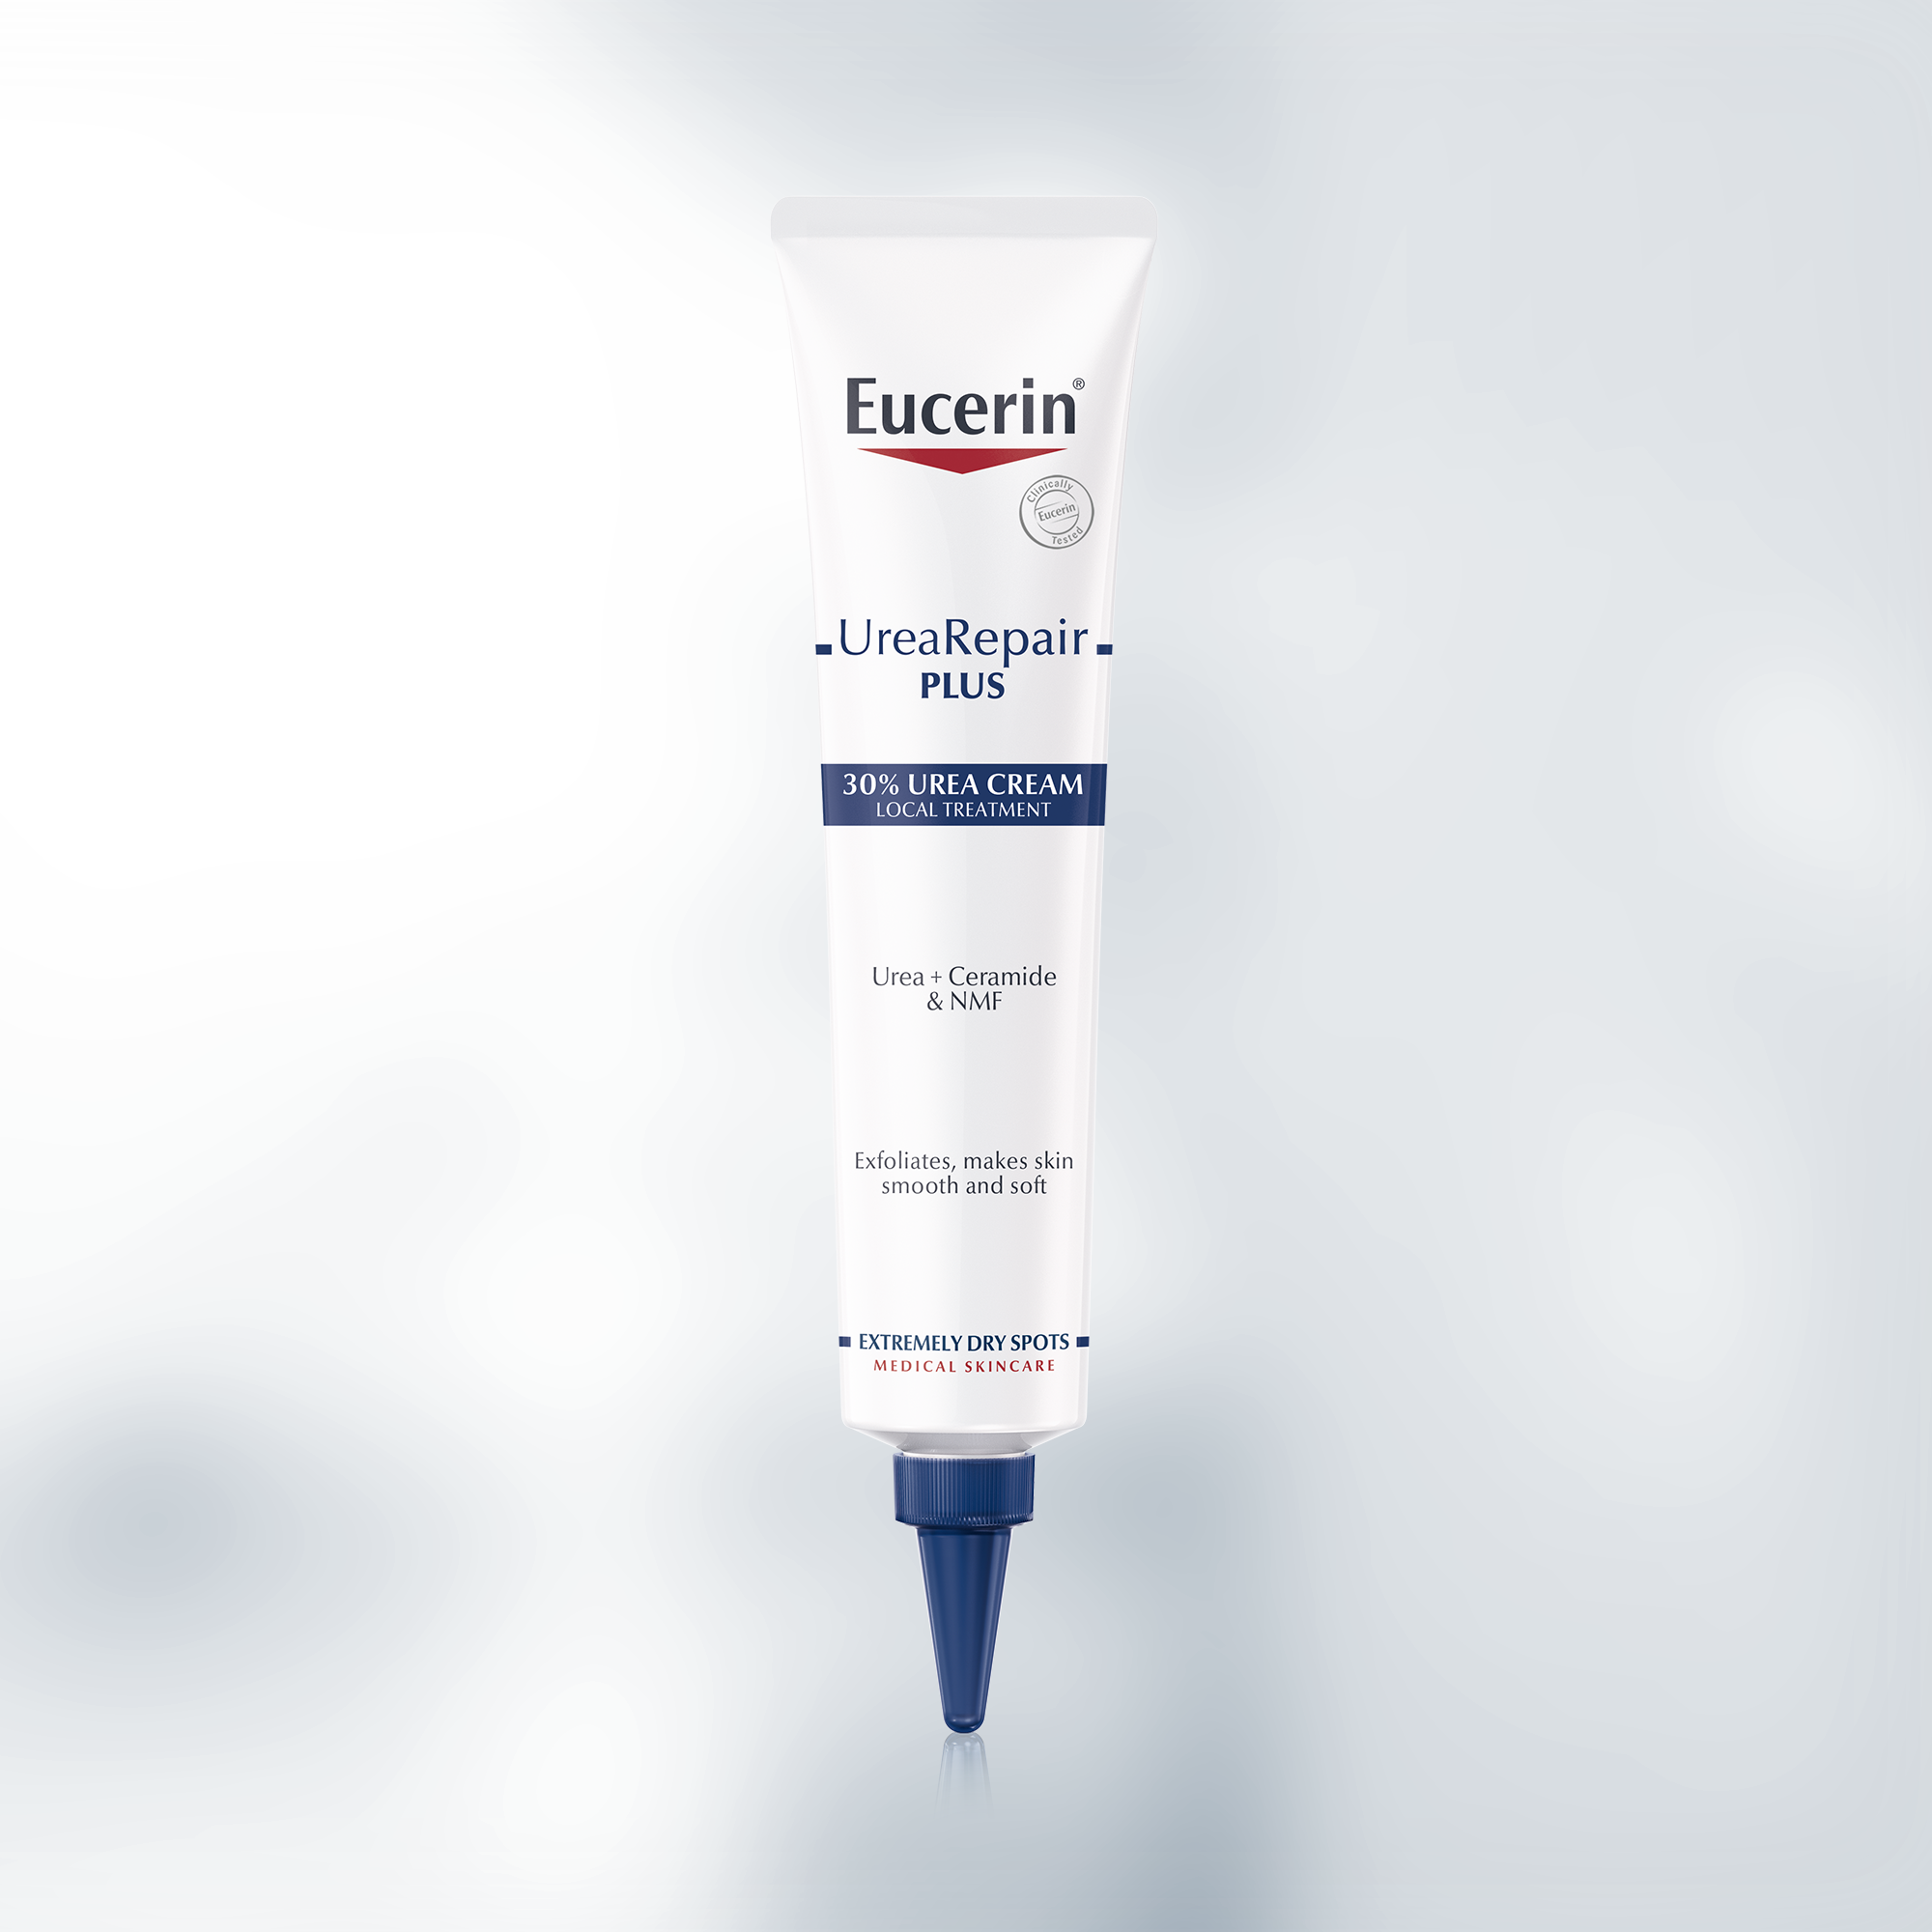 PLUS Treatment Cream Extremely areas of skin | Eucerin